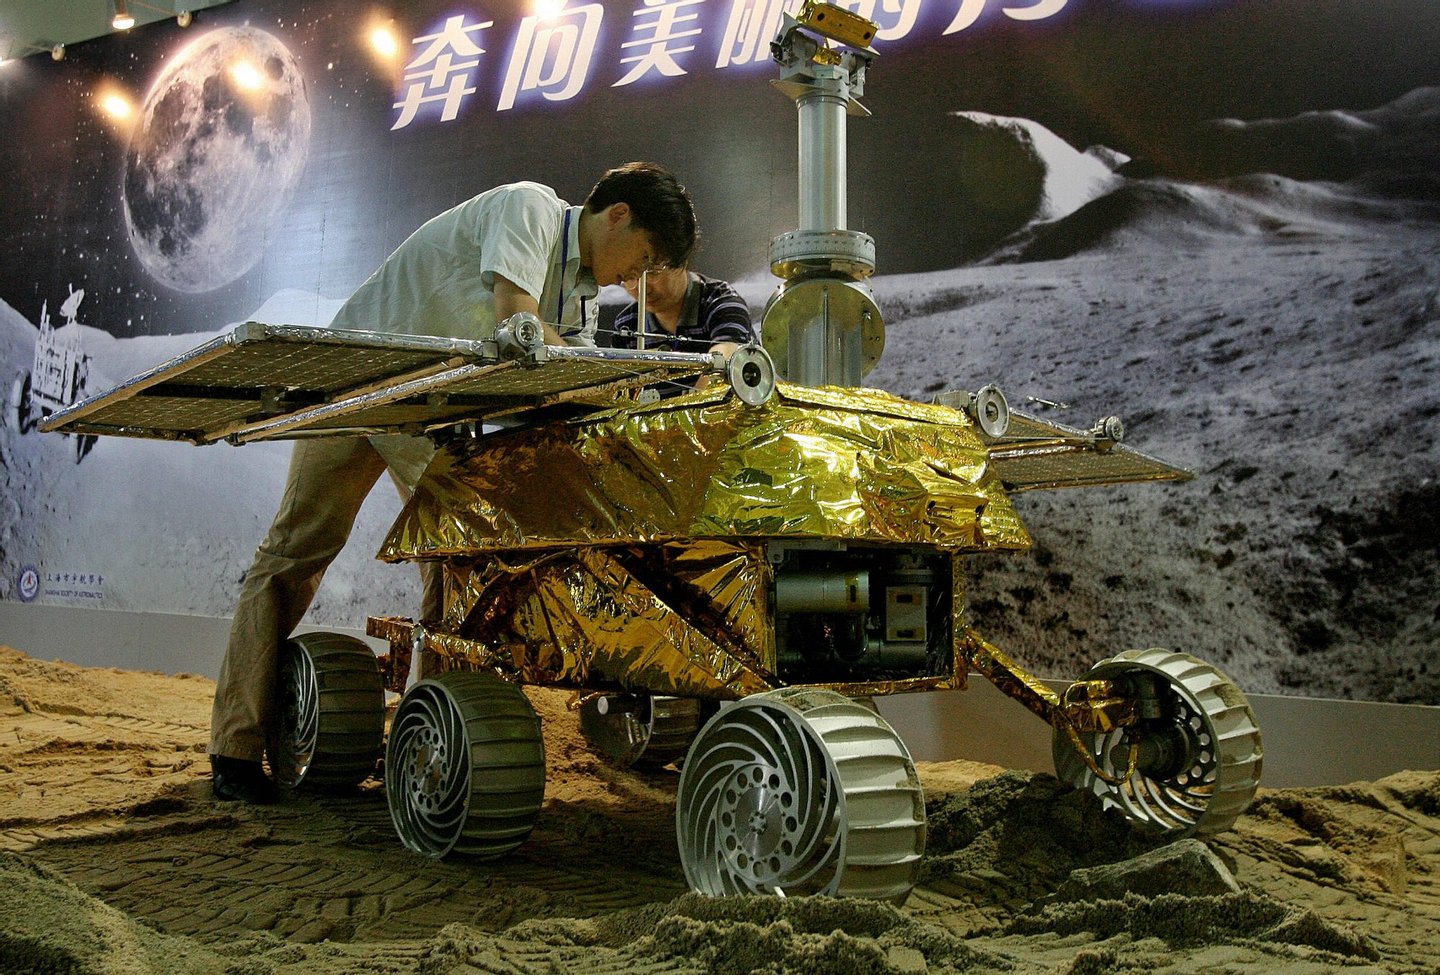 Shanghai, CHINA: Chinese technicians work on the MR-2 lunar vehicle, built by the Shanghai Aerospace Administration and on display at an aviation and space exhibition in Shanghai, 05 July 2007. The lunar vehicle robot, which can move at speeds up to 200 meters per hour, will start its exploration with China 's first moon landing probe as the second part of China's three- phase moon exploration program. State media reported China plans a manned lunar mission by 2024 that will include a walk on the moon's surface. AFP PHOTO/Mark RALSTON (Photo credit should read MARK RALSTON/AFP/Getty Images)